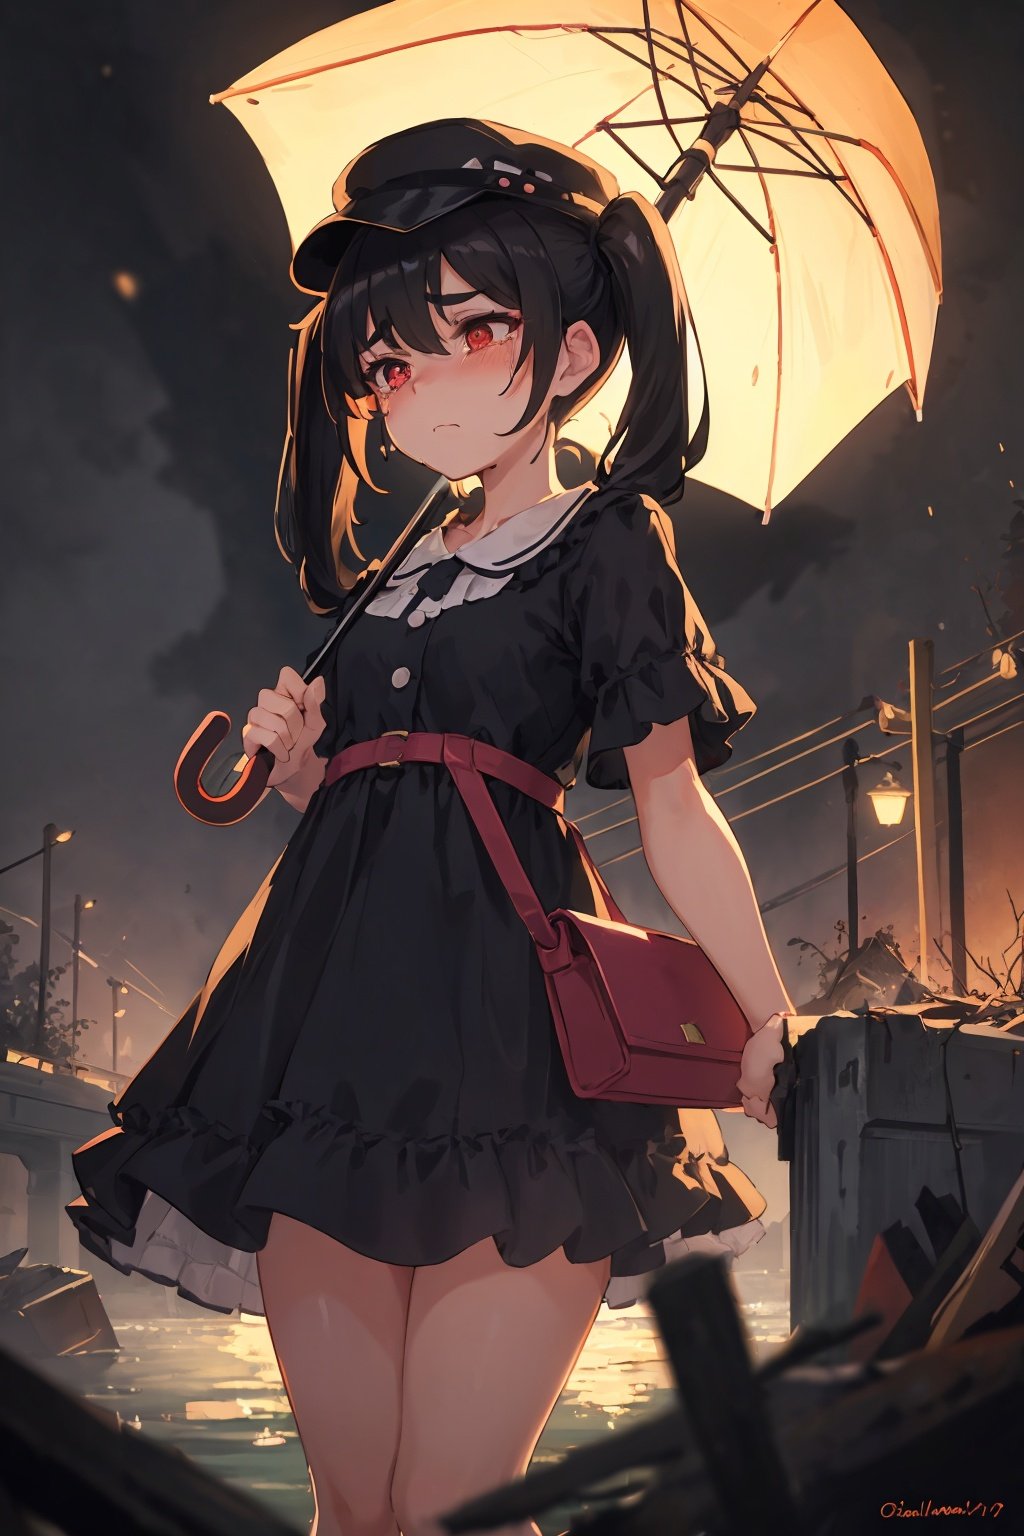 Original Character, Volumetric Lighting, Best Shadows, Shallow Depth of Field, Portrait Of Stunningly Beautiful Girl, Petite, Delicate Beautiful Attractive Face With Alluring Sharp Red Eyes, Sharp Eyebrows, Sadness Grieving, Weeping, Closed Mouth, Lovely Small Breasts, Layered Medium Twintail Black Hair, Blush Eyeshadow, Thick Eyelashes, Rollable Fedora Hat, Holding Black Umbrella, CrossBody Bag, Black Frill Hem Shirt Dress, Thigh Highs, Oil Street Lamp, Standing In The Pouring Rain, At Night, Under The Collapsed Bridge, Debris Float In The River, Crushed Cars, Looking At Other, (Highest Quality, Amazing Details:1.25), (Solo:1.3), Gloomy Paintings